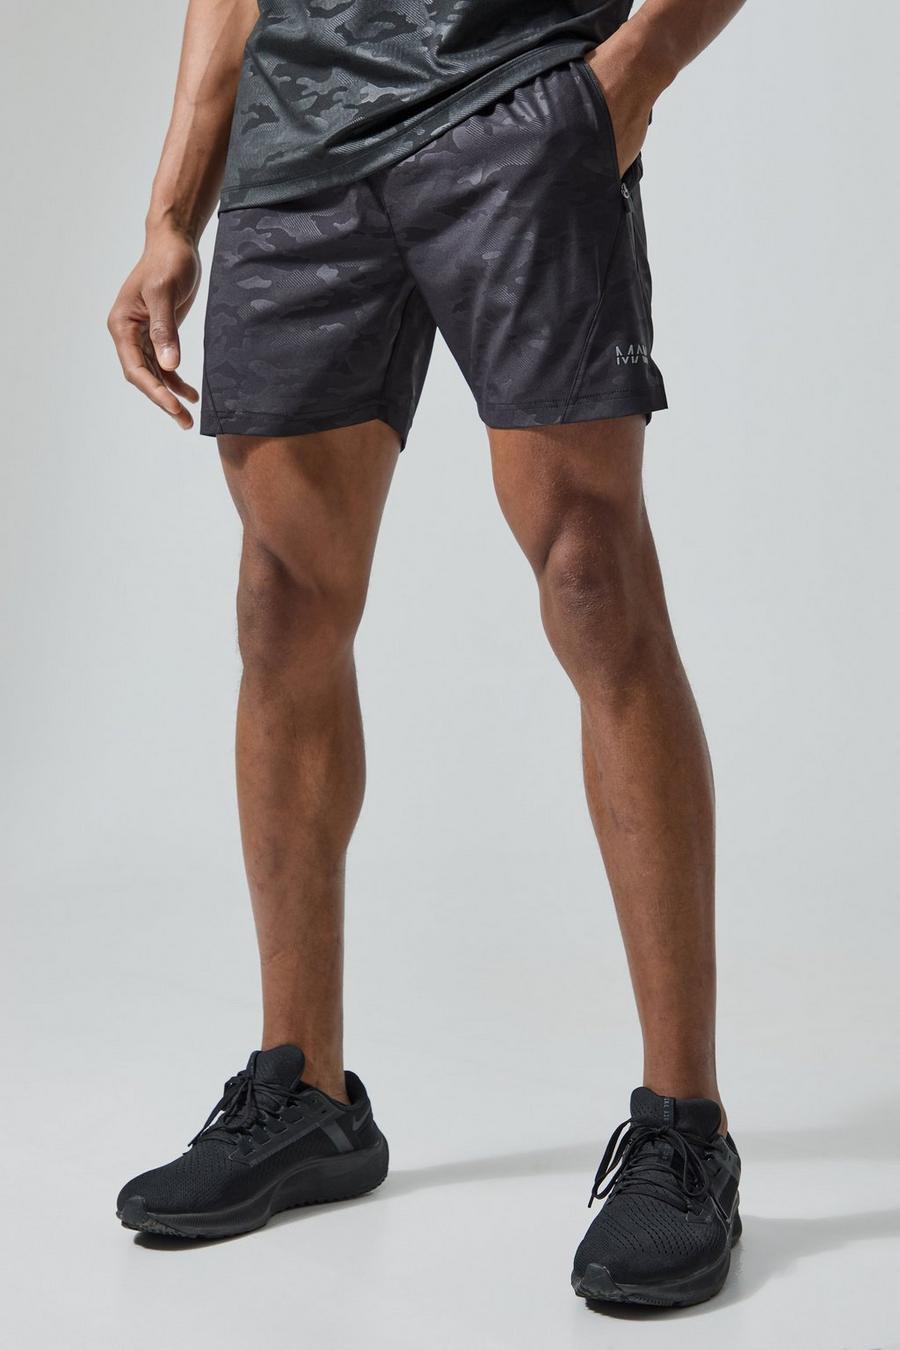 Man Active 5 Inch Camouflage Shorts, Black